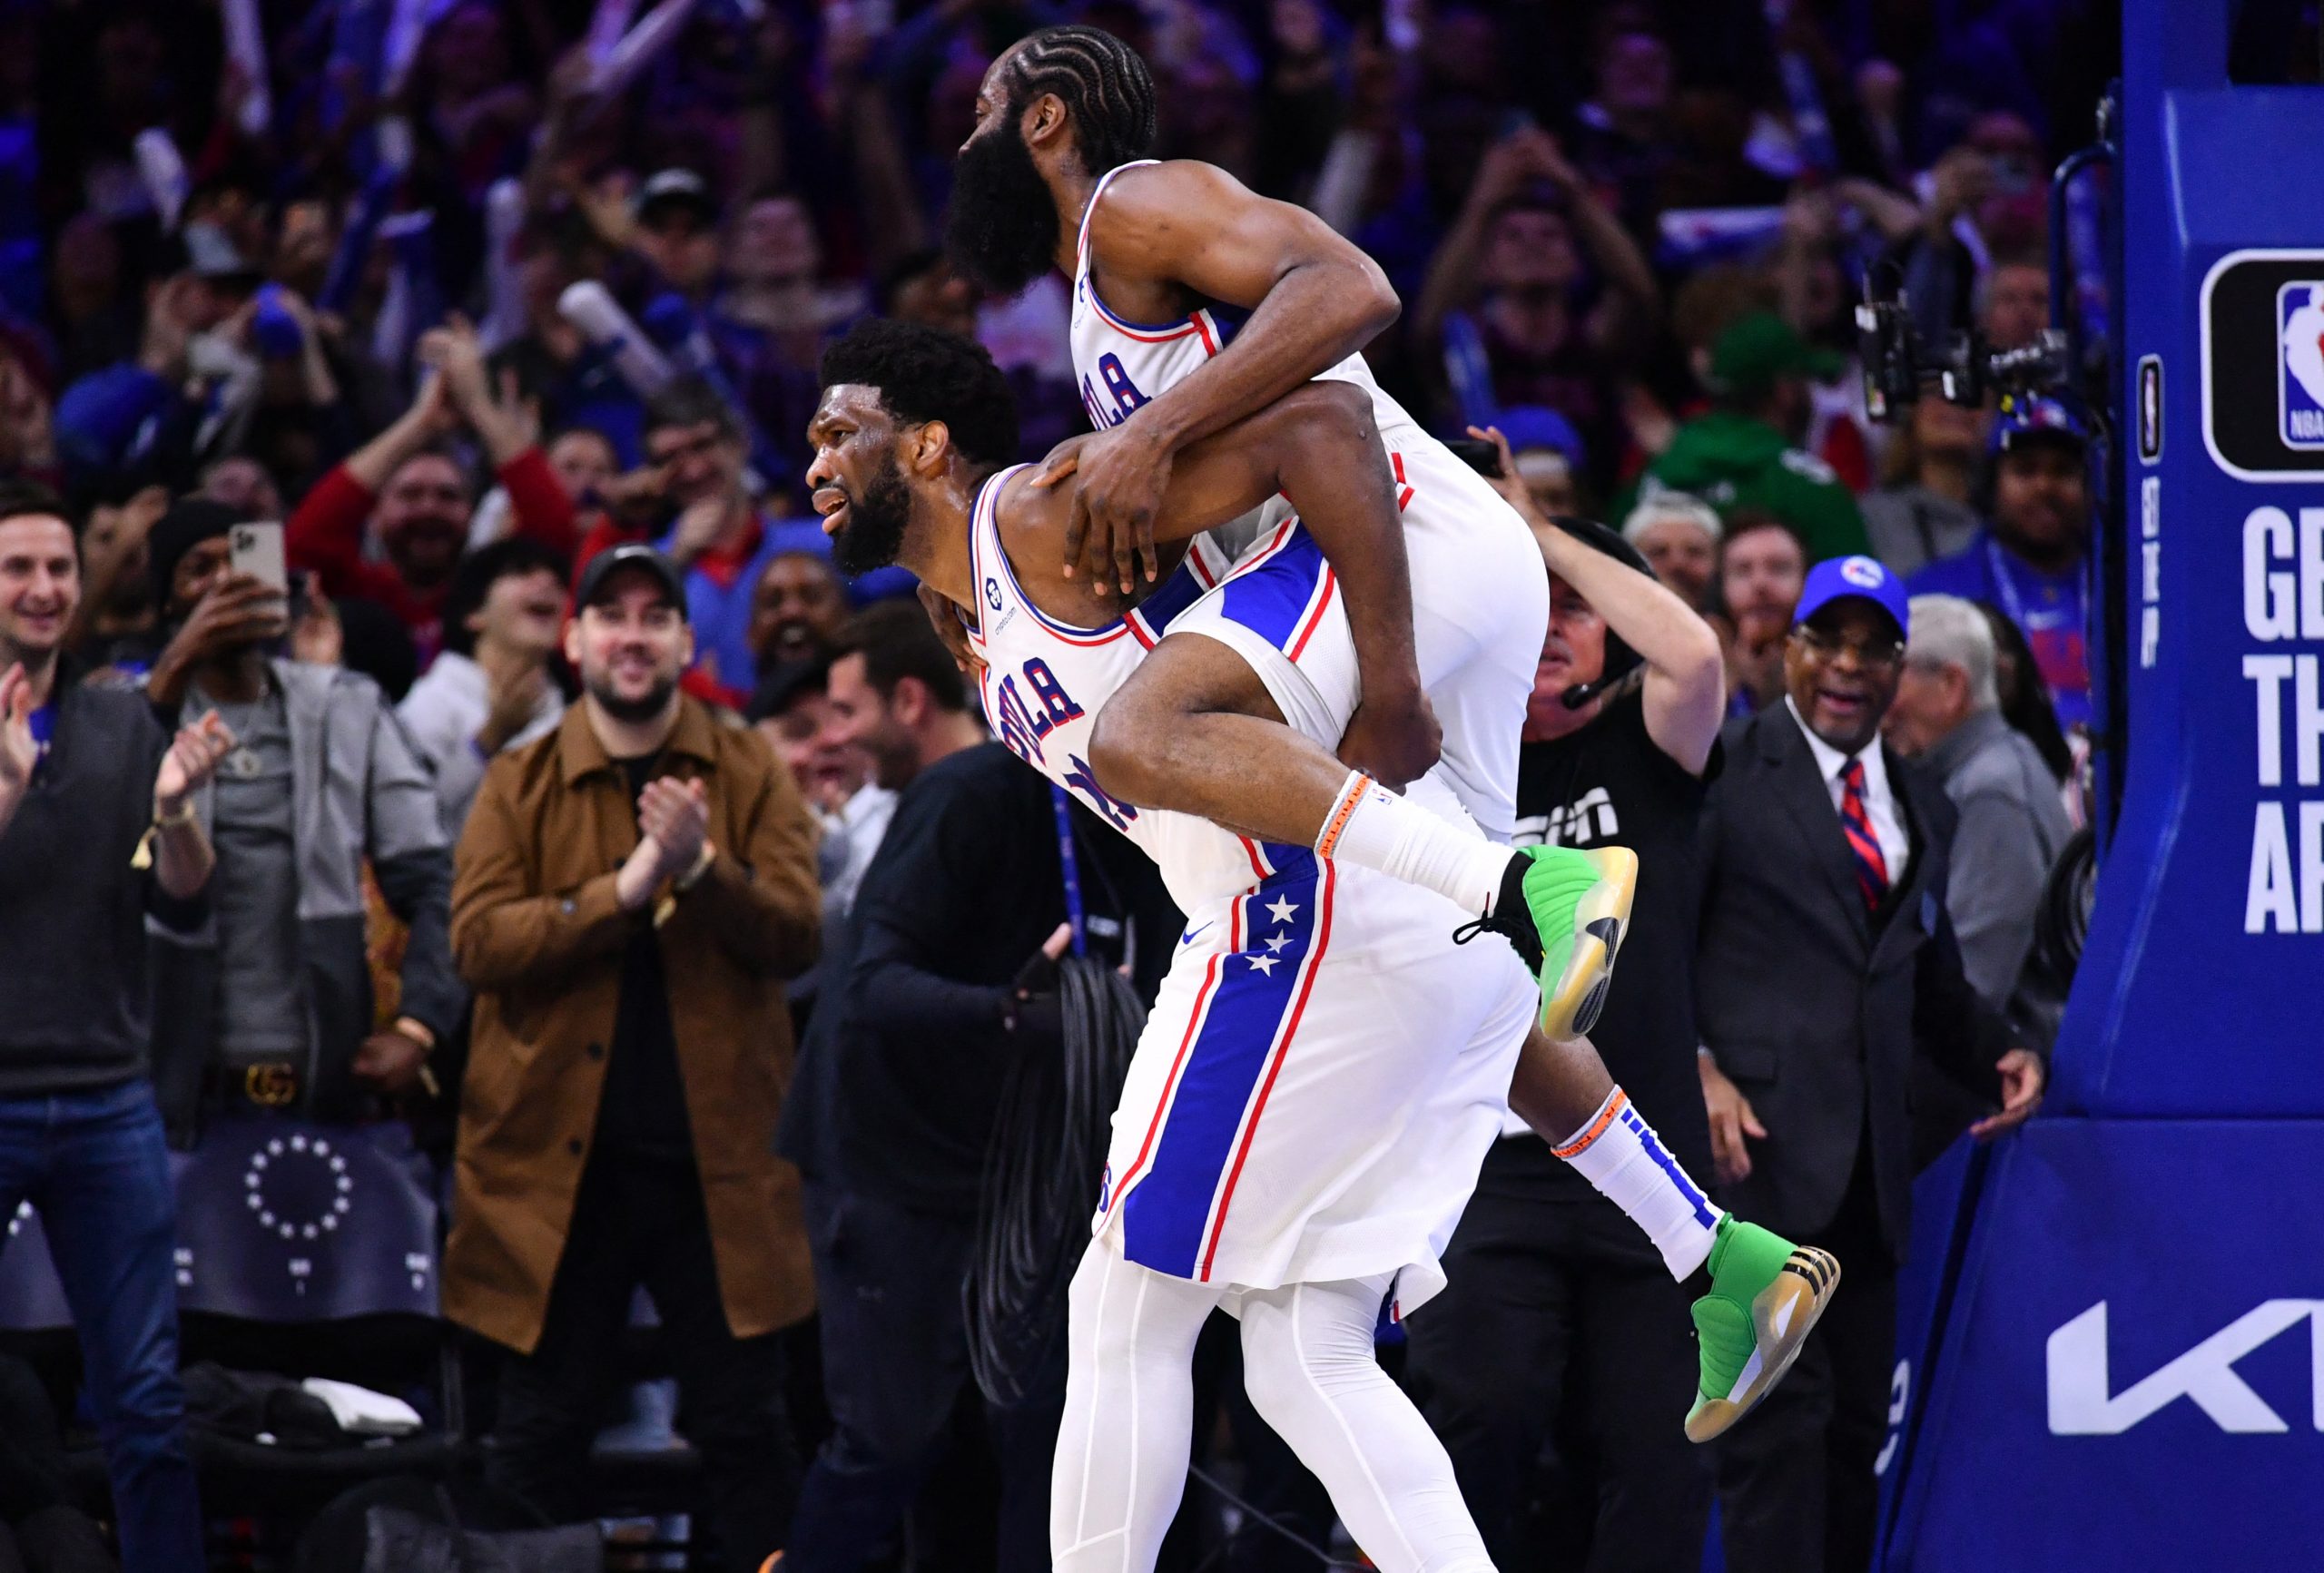 Jan 28, 2023; Philadelphia, Pennsylvania, USA; Philadelphia 76ers guard James Harden (1) celebrates with center Joel Embiid (21) after a score against the Denver Nuggets in the fourth quarter at Wells Fargo Center. Mandatory Credit: Kyle Ross-USA TODAY Sports Photo: Kyle Ross/REUTERS